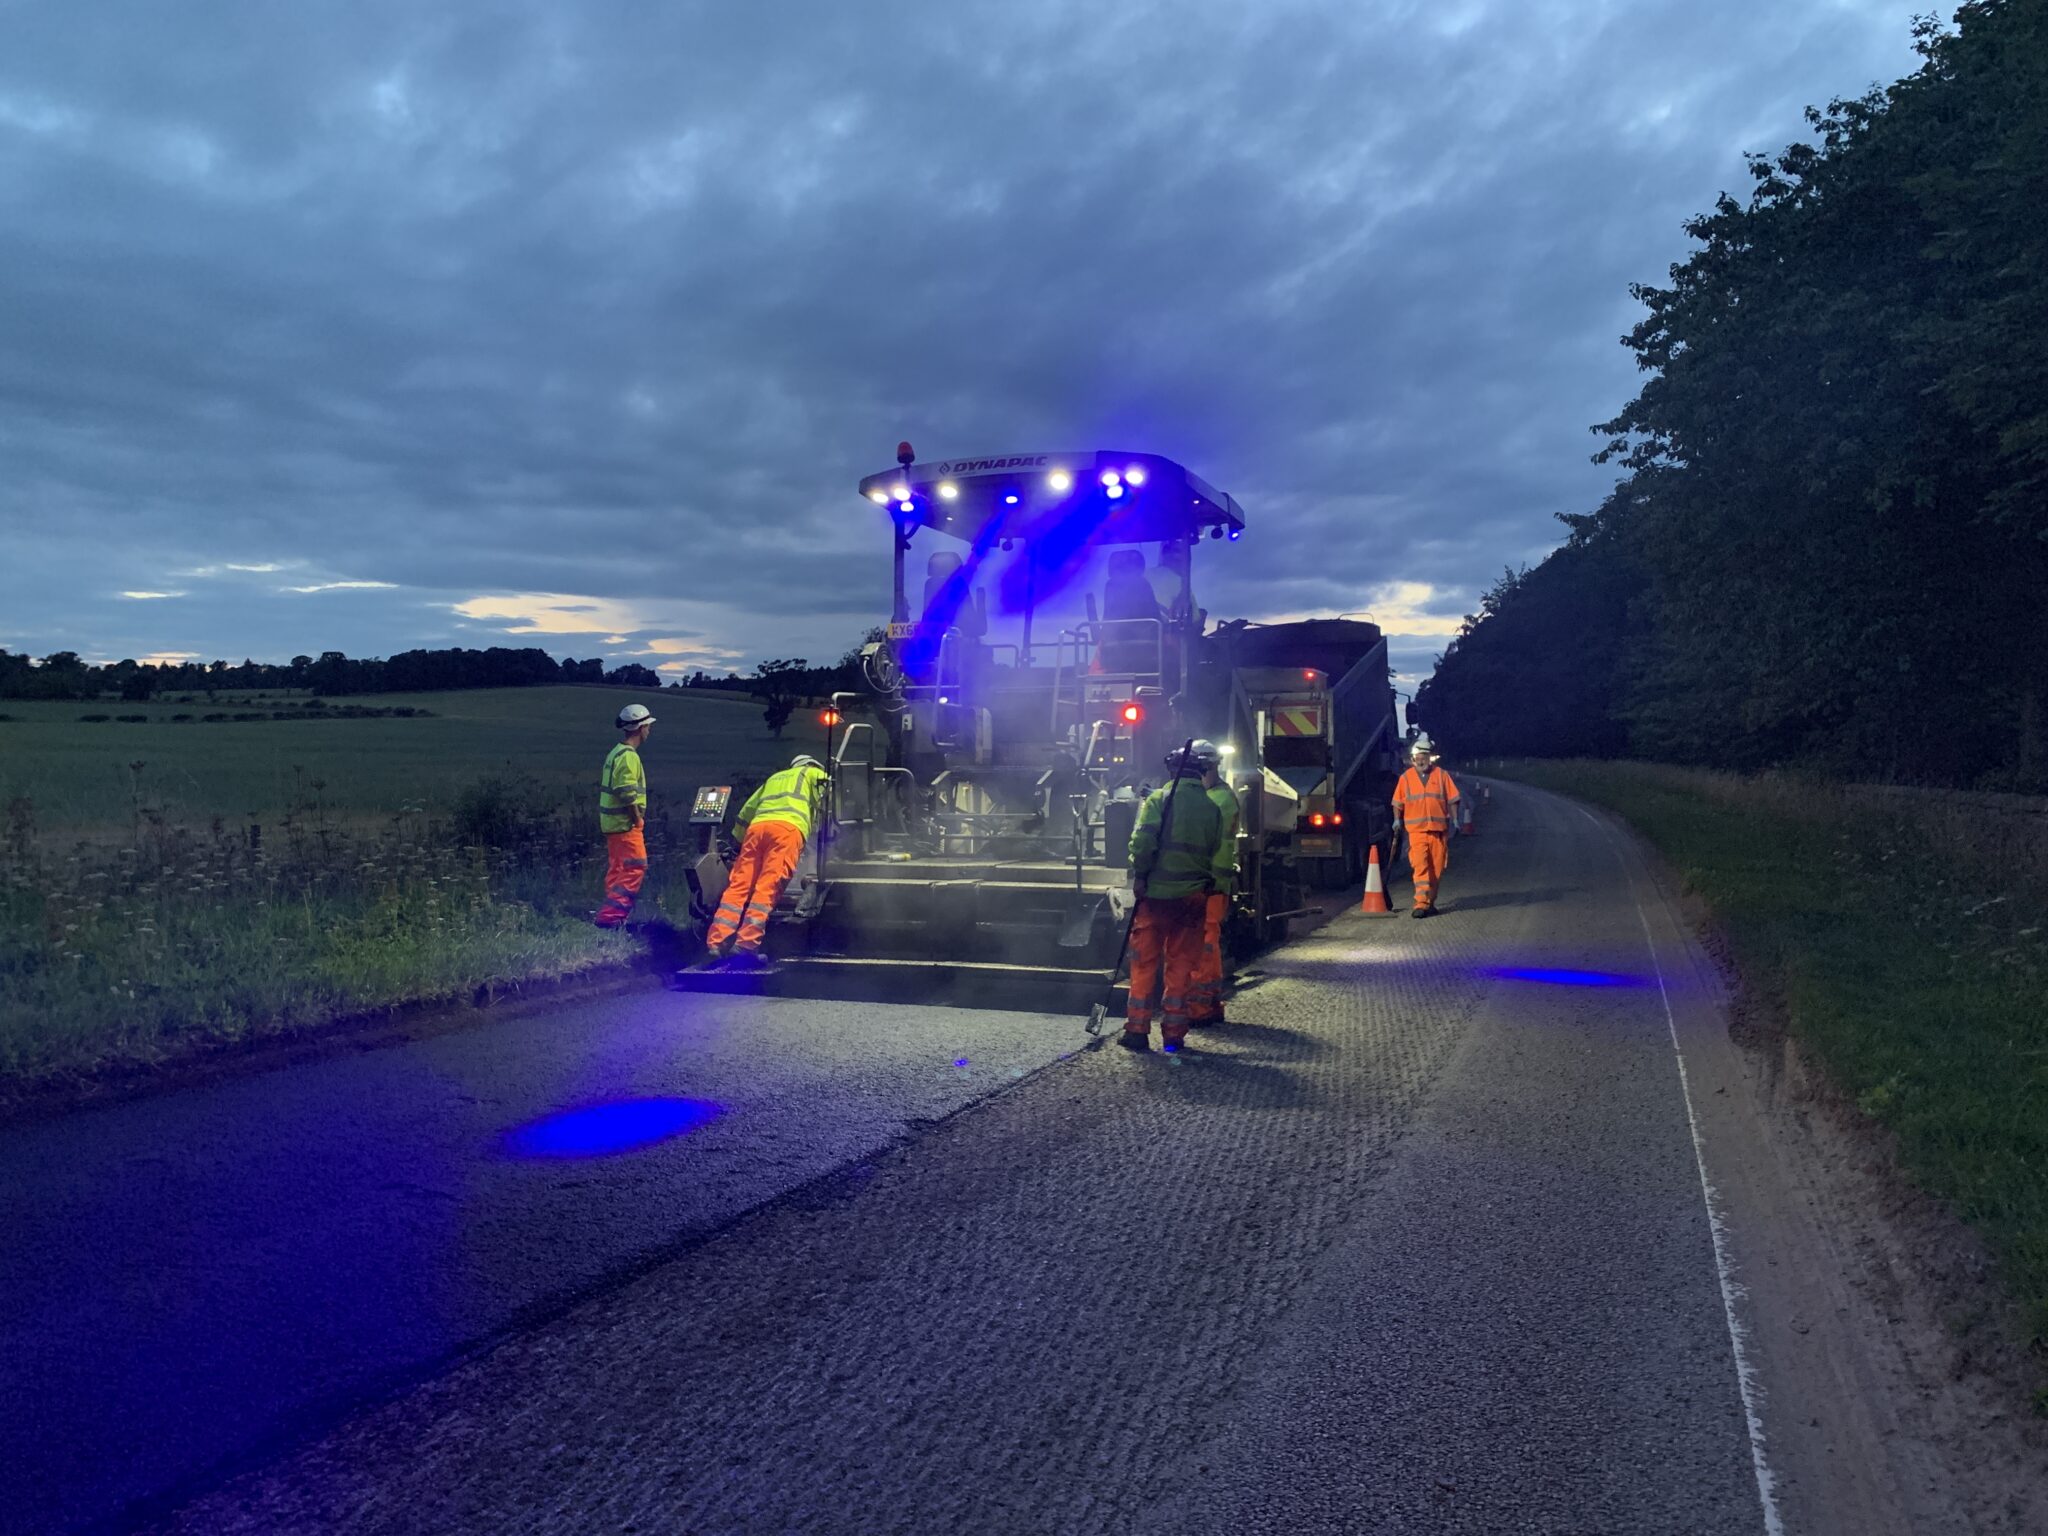 RESURFACING WORKS AT THE A82 GLENURQUHART ROAD, INVERNESS EXTENDED BY ONE NIGHT